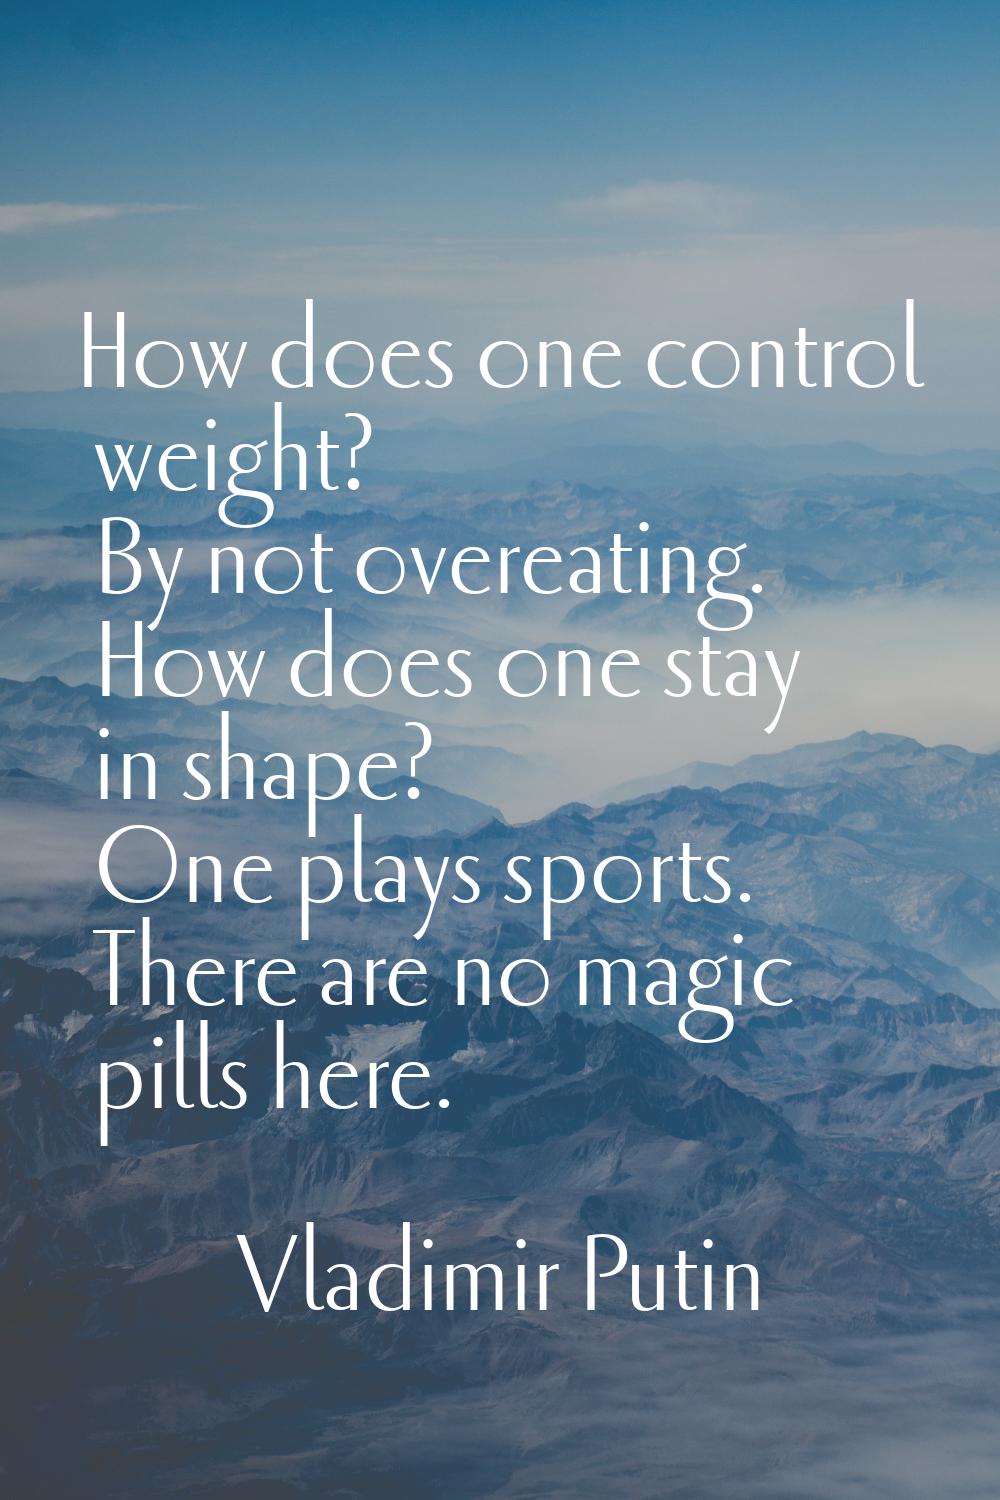 How does one control weight? By not overeating. How does one stay in shape? One plays sports. There